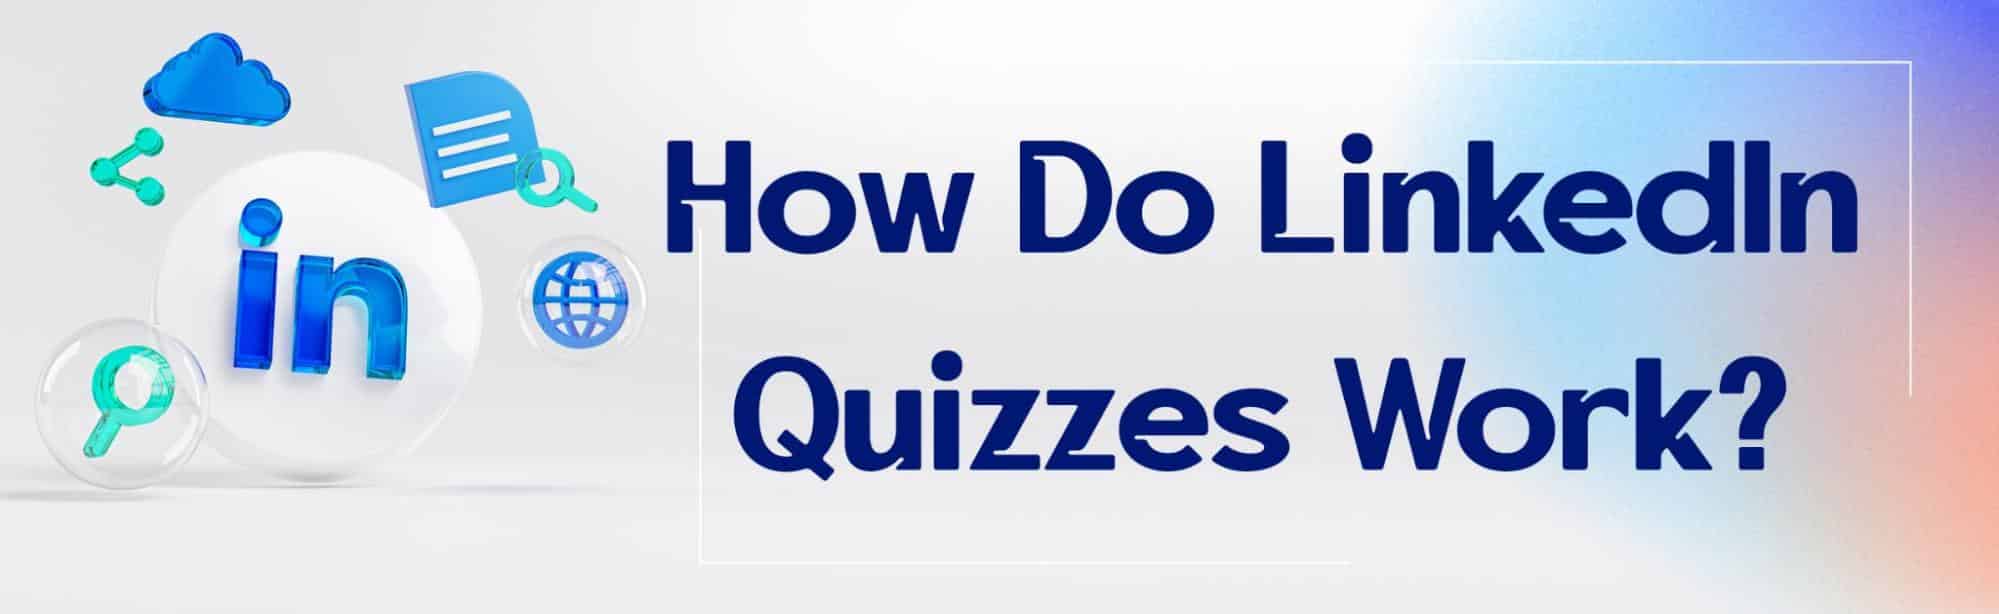 How Do LinkedIn Quizzes Work & Everything You Need to Know About Them?